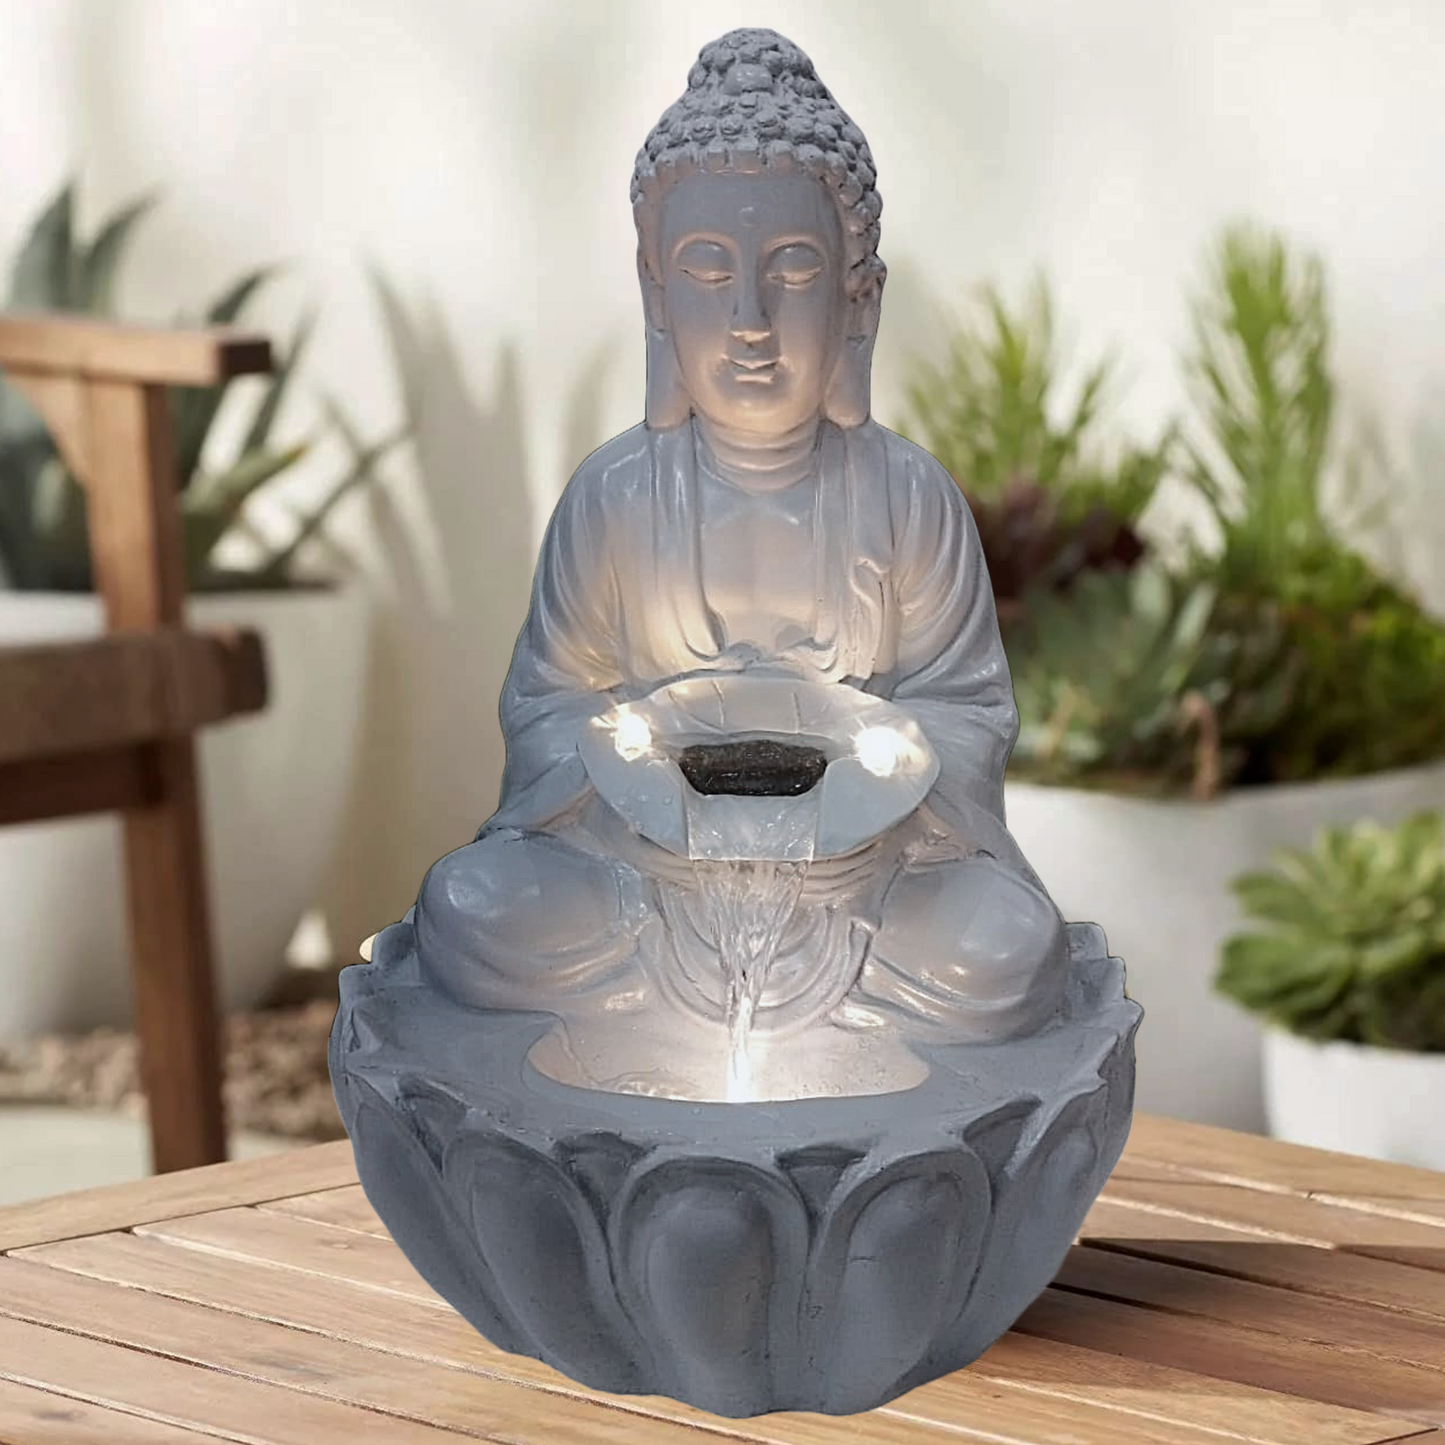 Water Fountain ALiLA Kamal Buddha Idol Table Top Water Fall Fountain with LED Lights Home Decoration Indoor Outdoor Gift Gifting Items, 21 inches, Grey Water Fountain